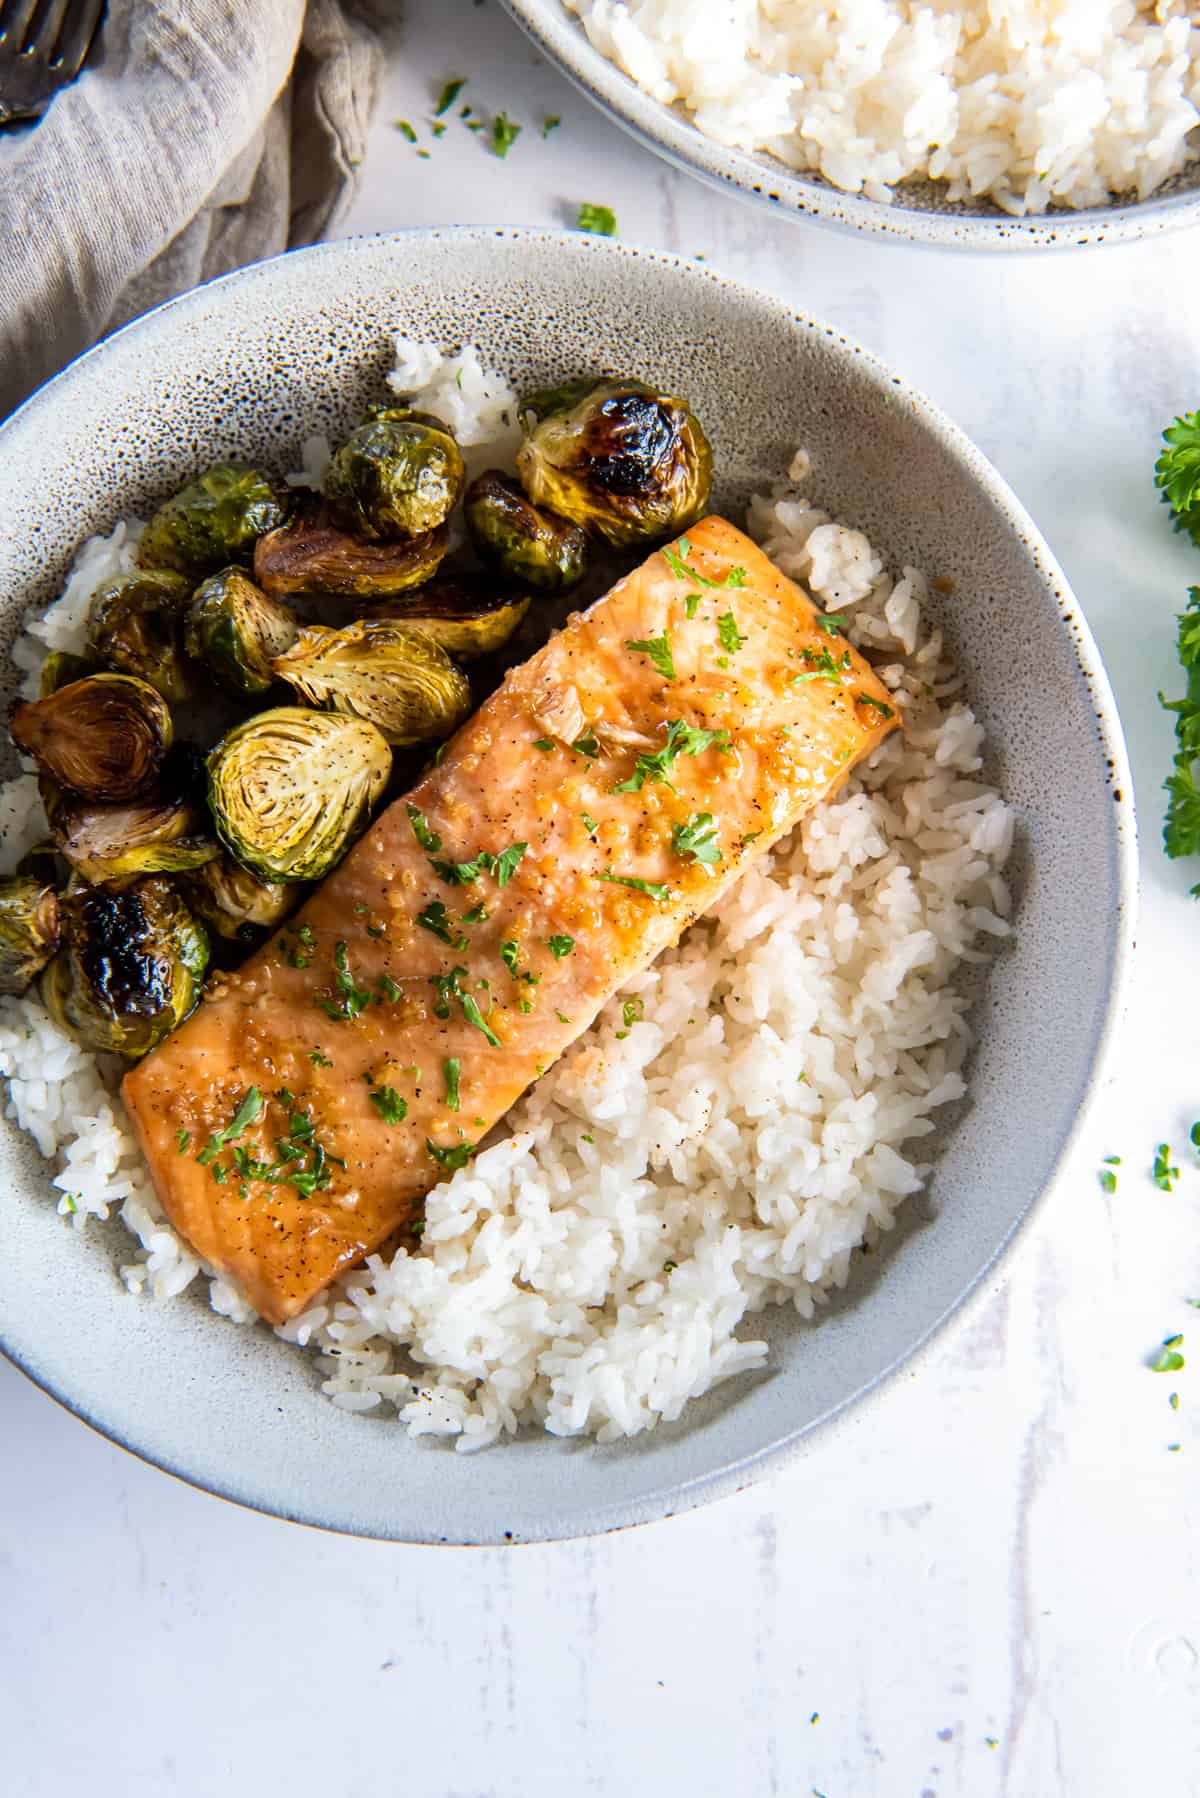 Roasted Salmon in a bowl with rice and brussels sprouts.